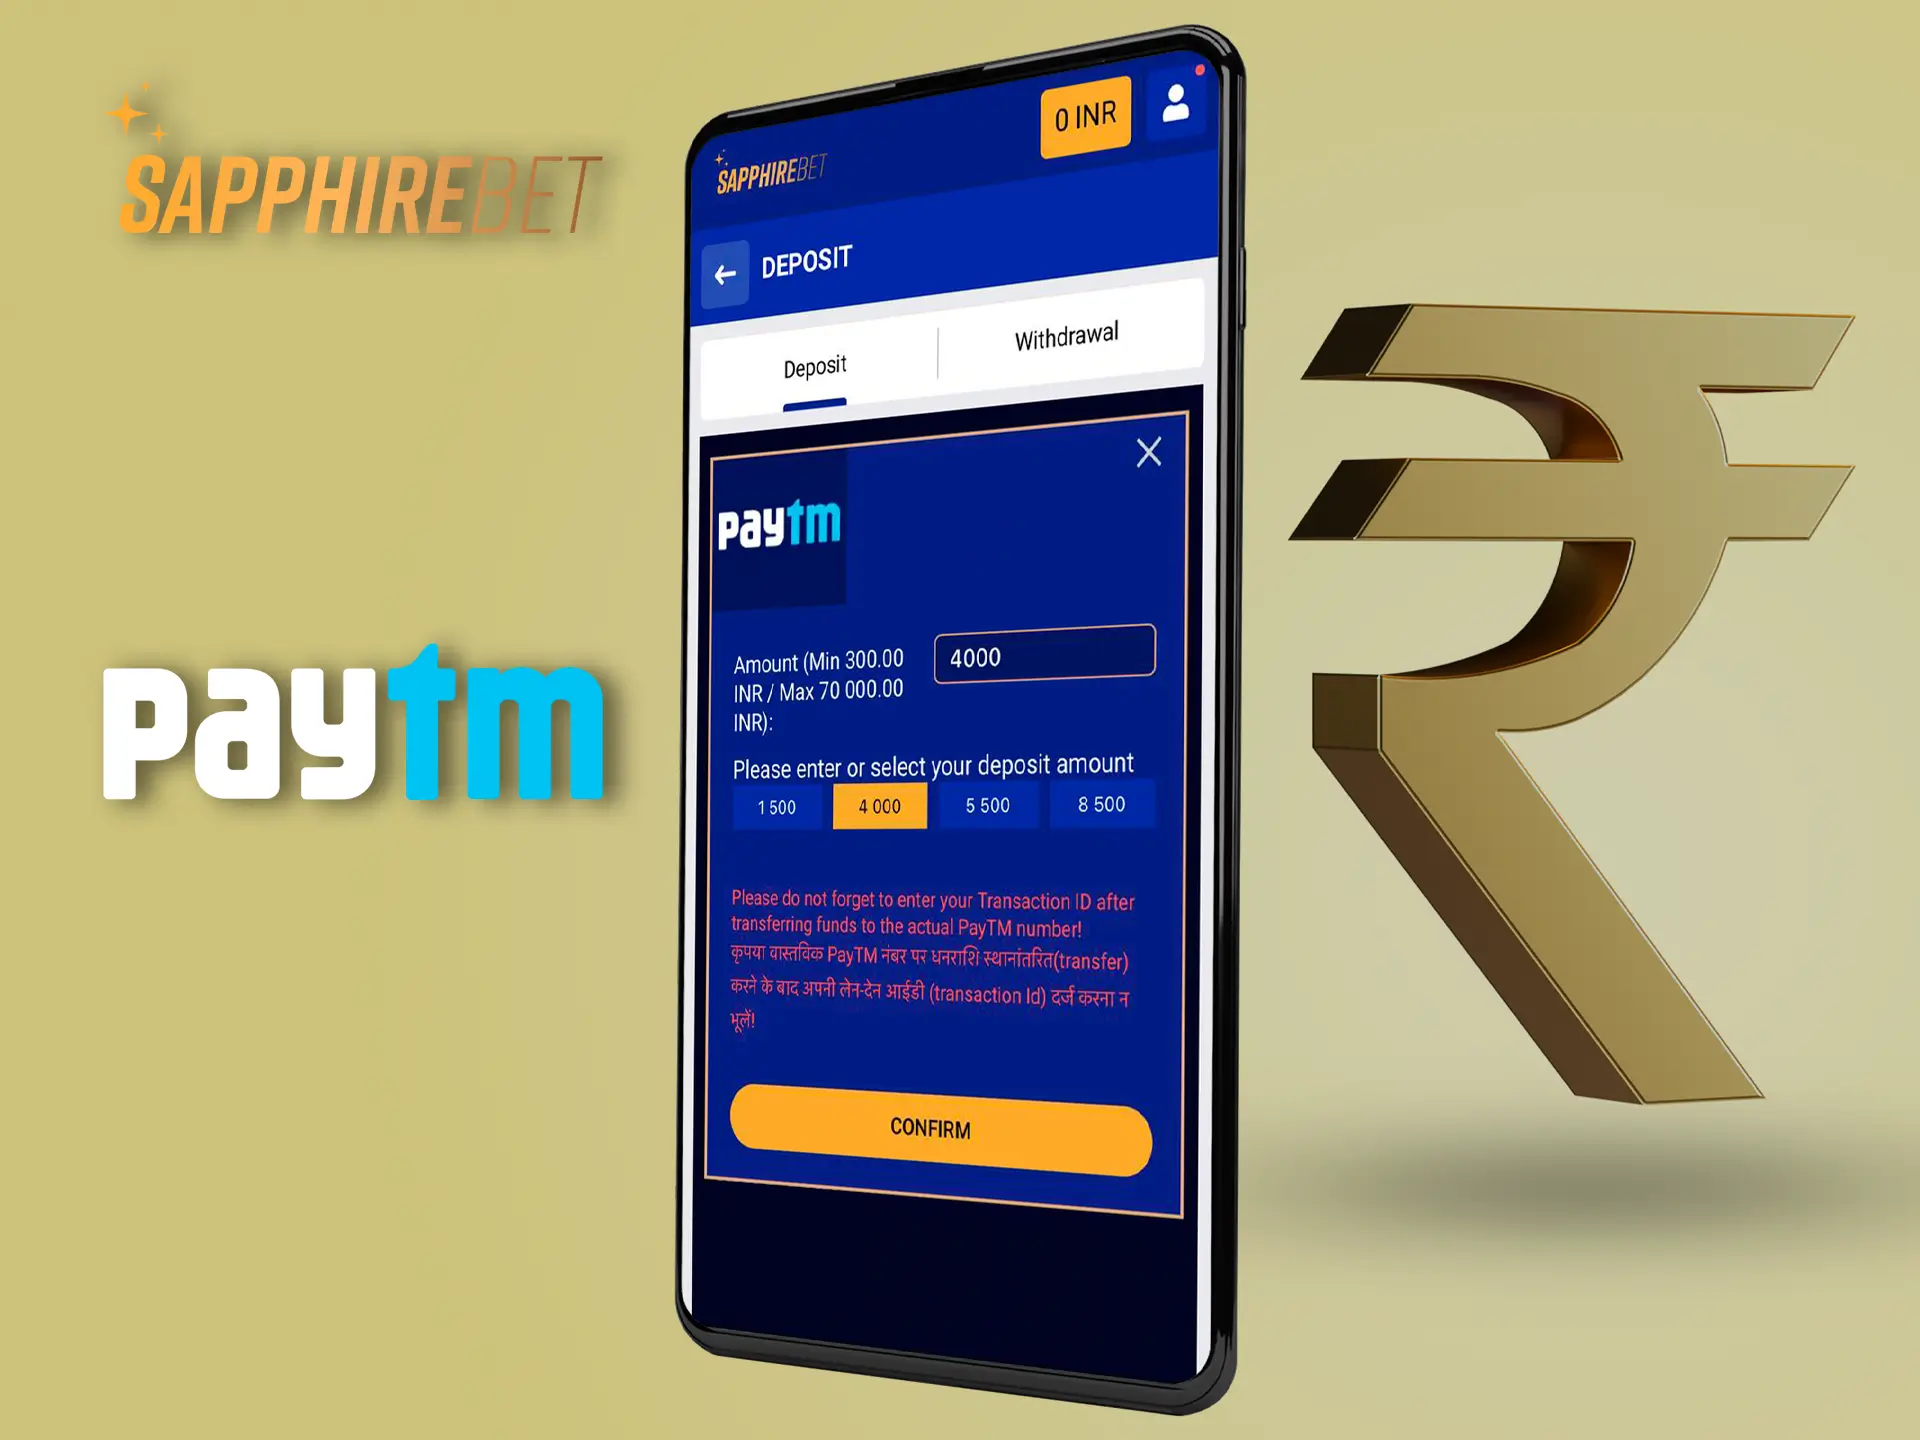 SapphireBet and the support team will always help you deposit or withdraw your funds via PayTm.